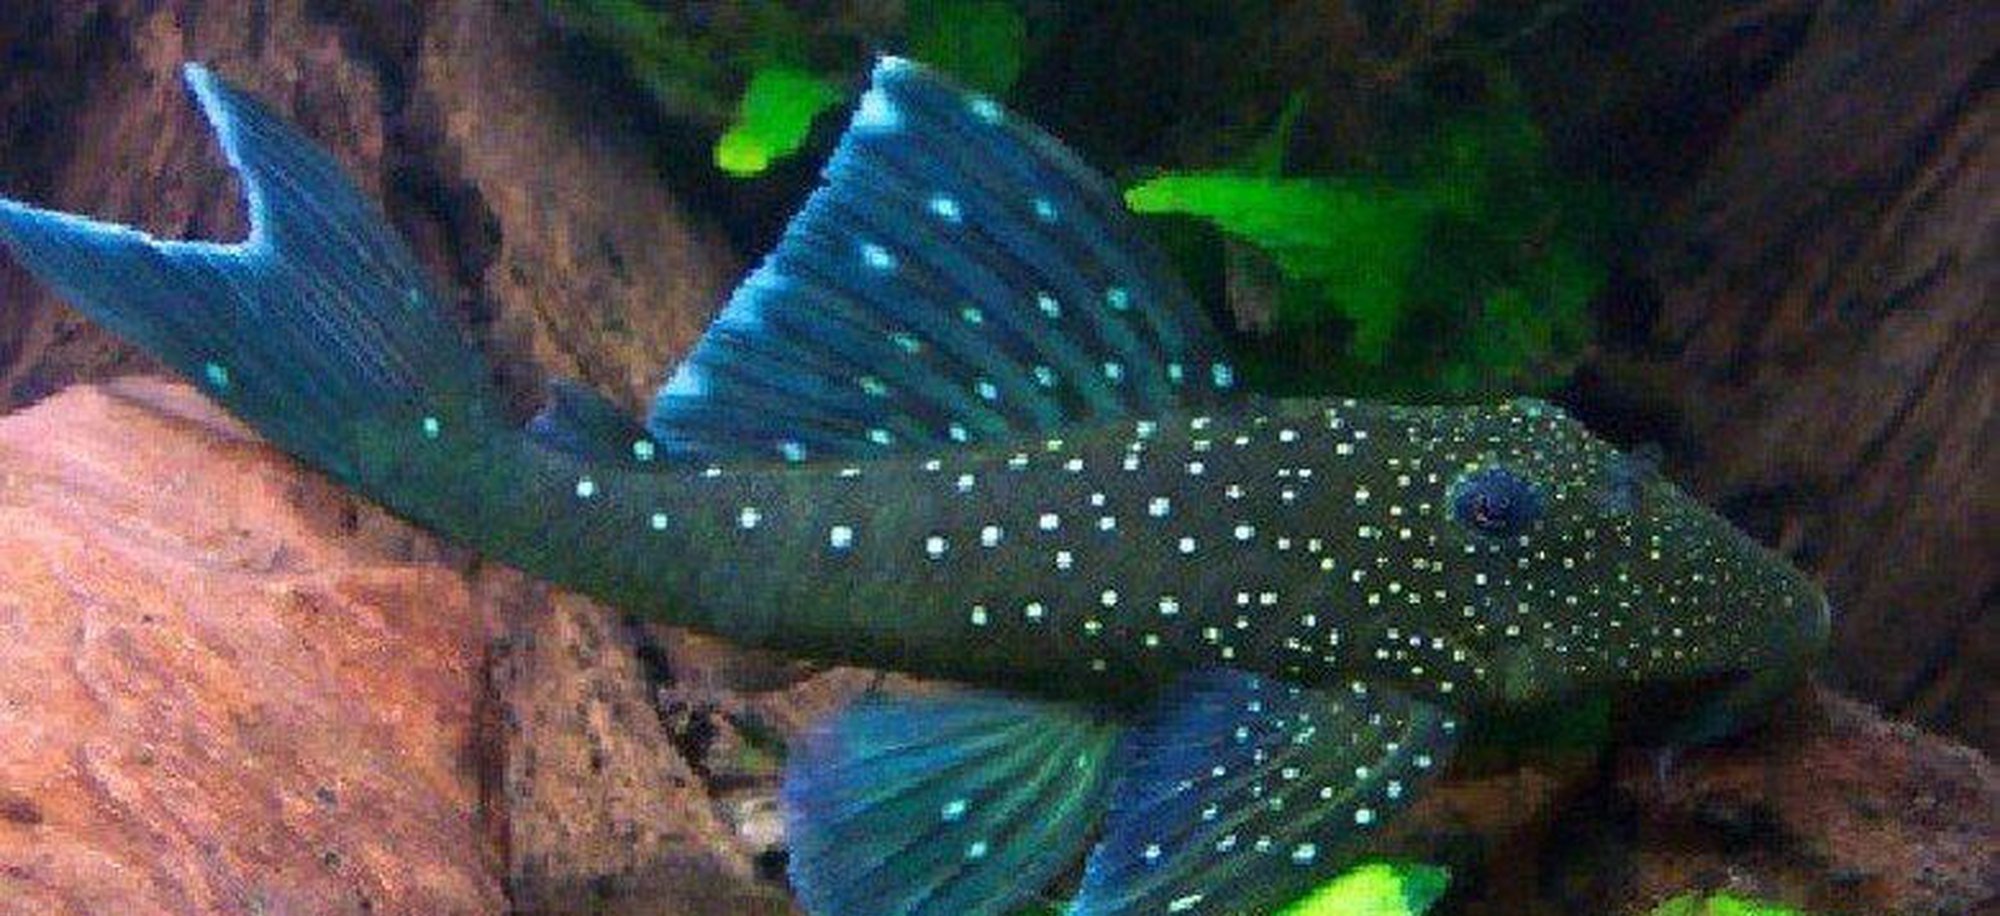 X1 Blue Phantom Pleco Sm/Med 1" - 2" Tank Cleaners! Free Shipping-Freshwater Fish Package-www.YourFishStore.com